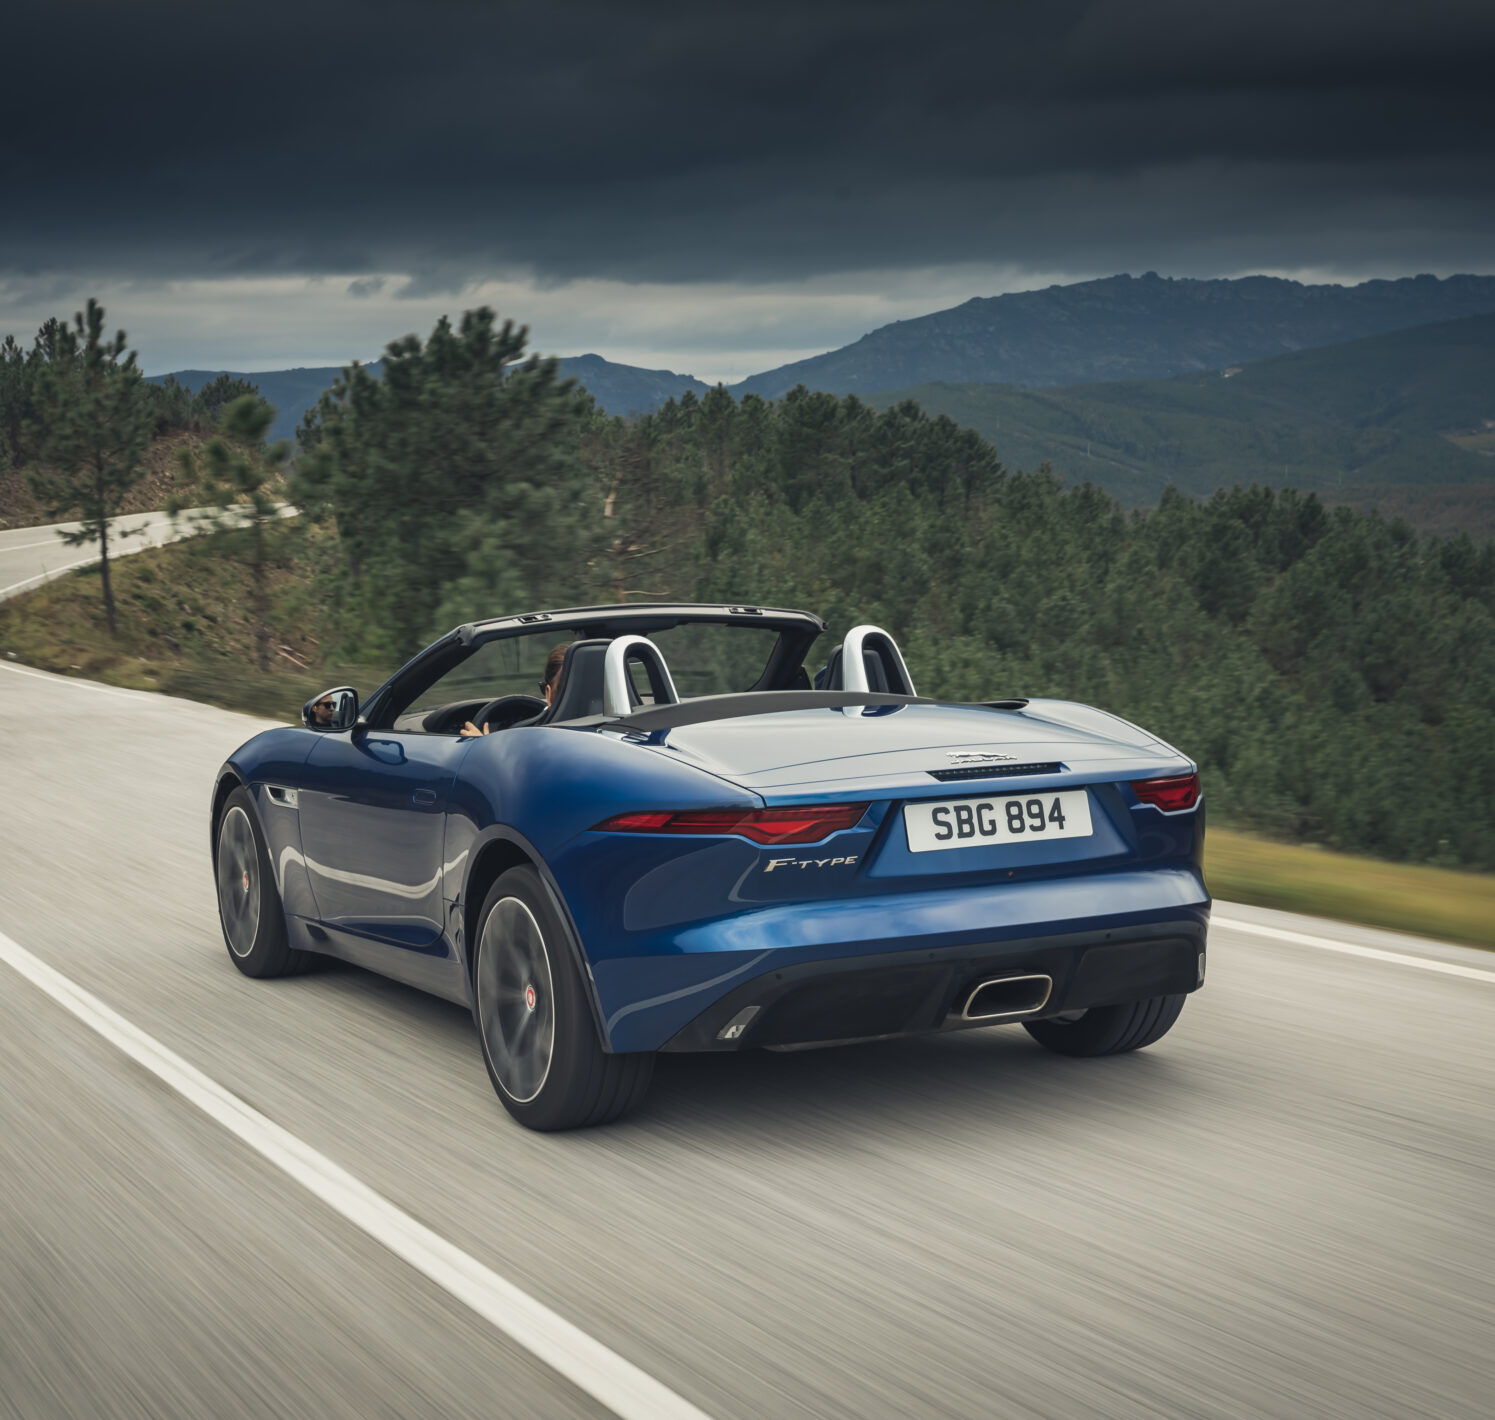 https://autofilter.sk/assets/images/f-type/gallery/New-Jaguar-F-TYPE_P300-Convertible-RWD_Bluefire_0011.jpeg - obrazok